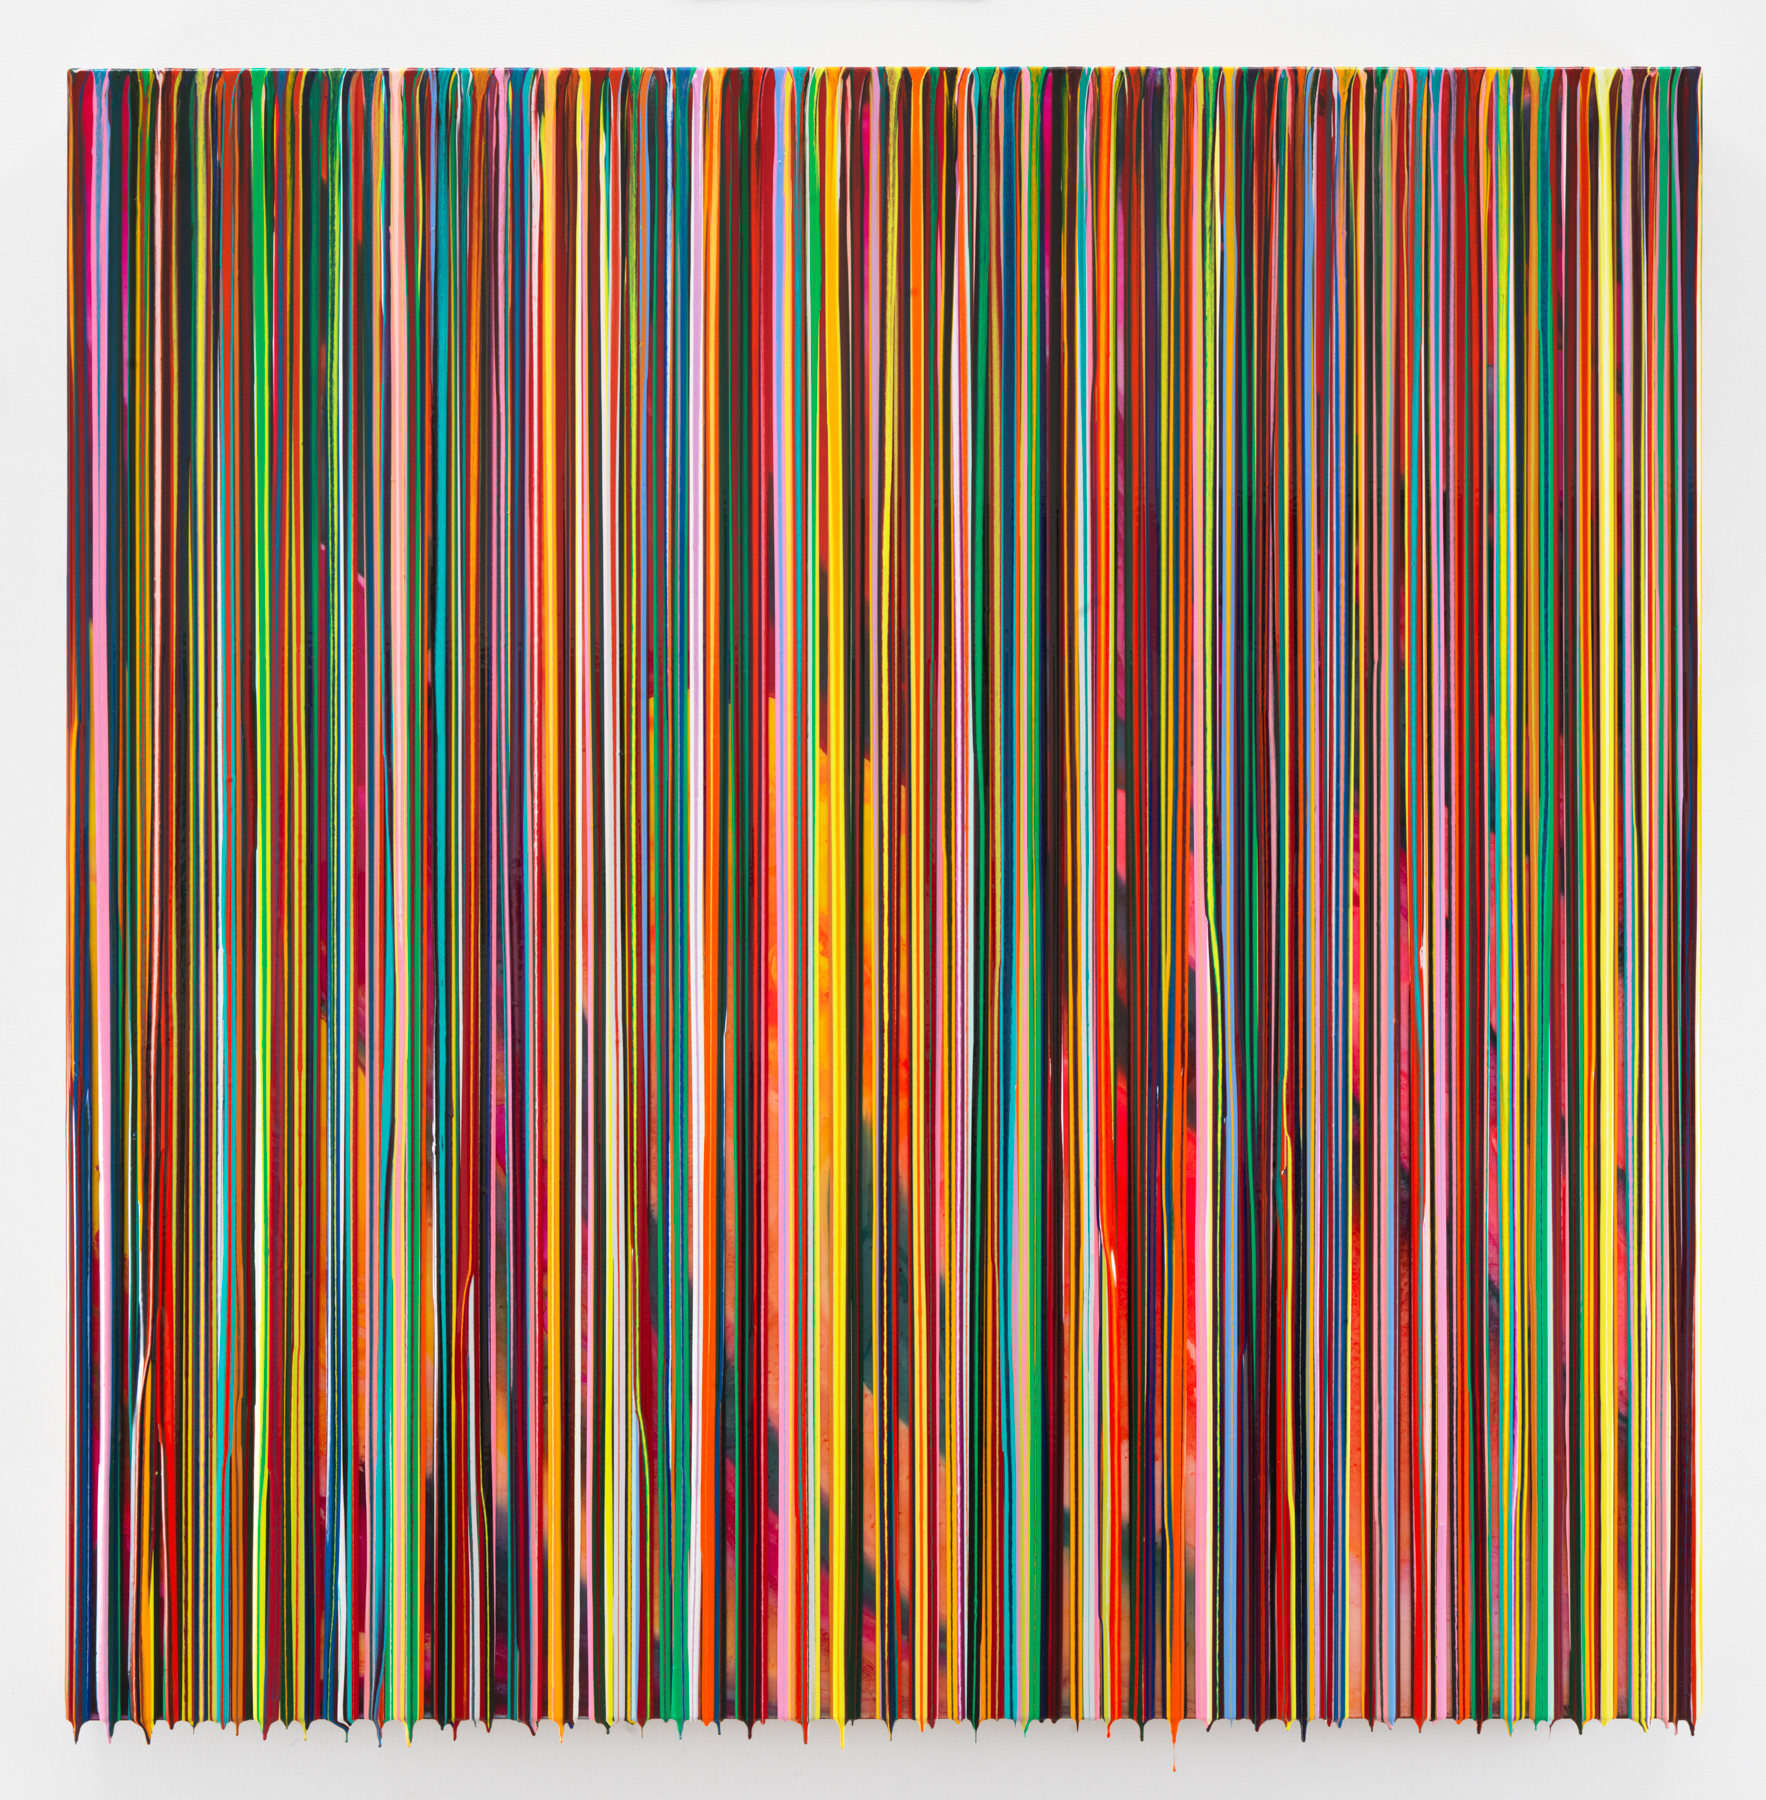 WEWILLFINDNOWTOMORROW(BRUELLEN), 2016, Epoxy resin and pigments on wood, 60 x 60 inches, 152.4 x 152.4 cm, AMY#28370